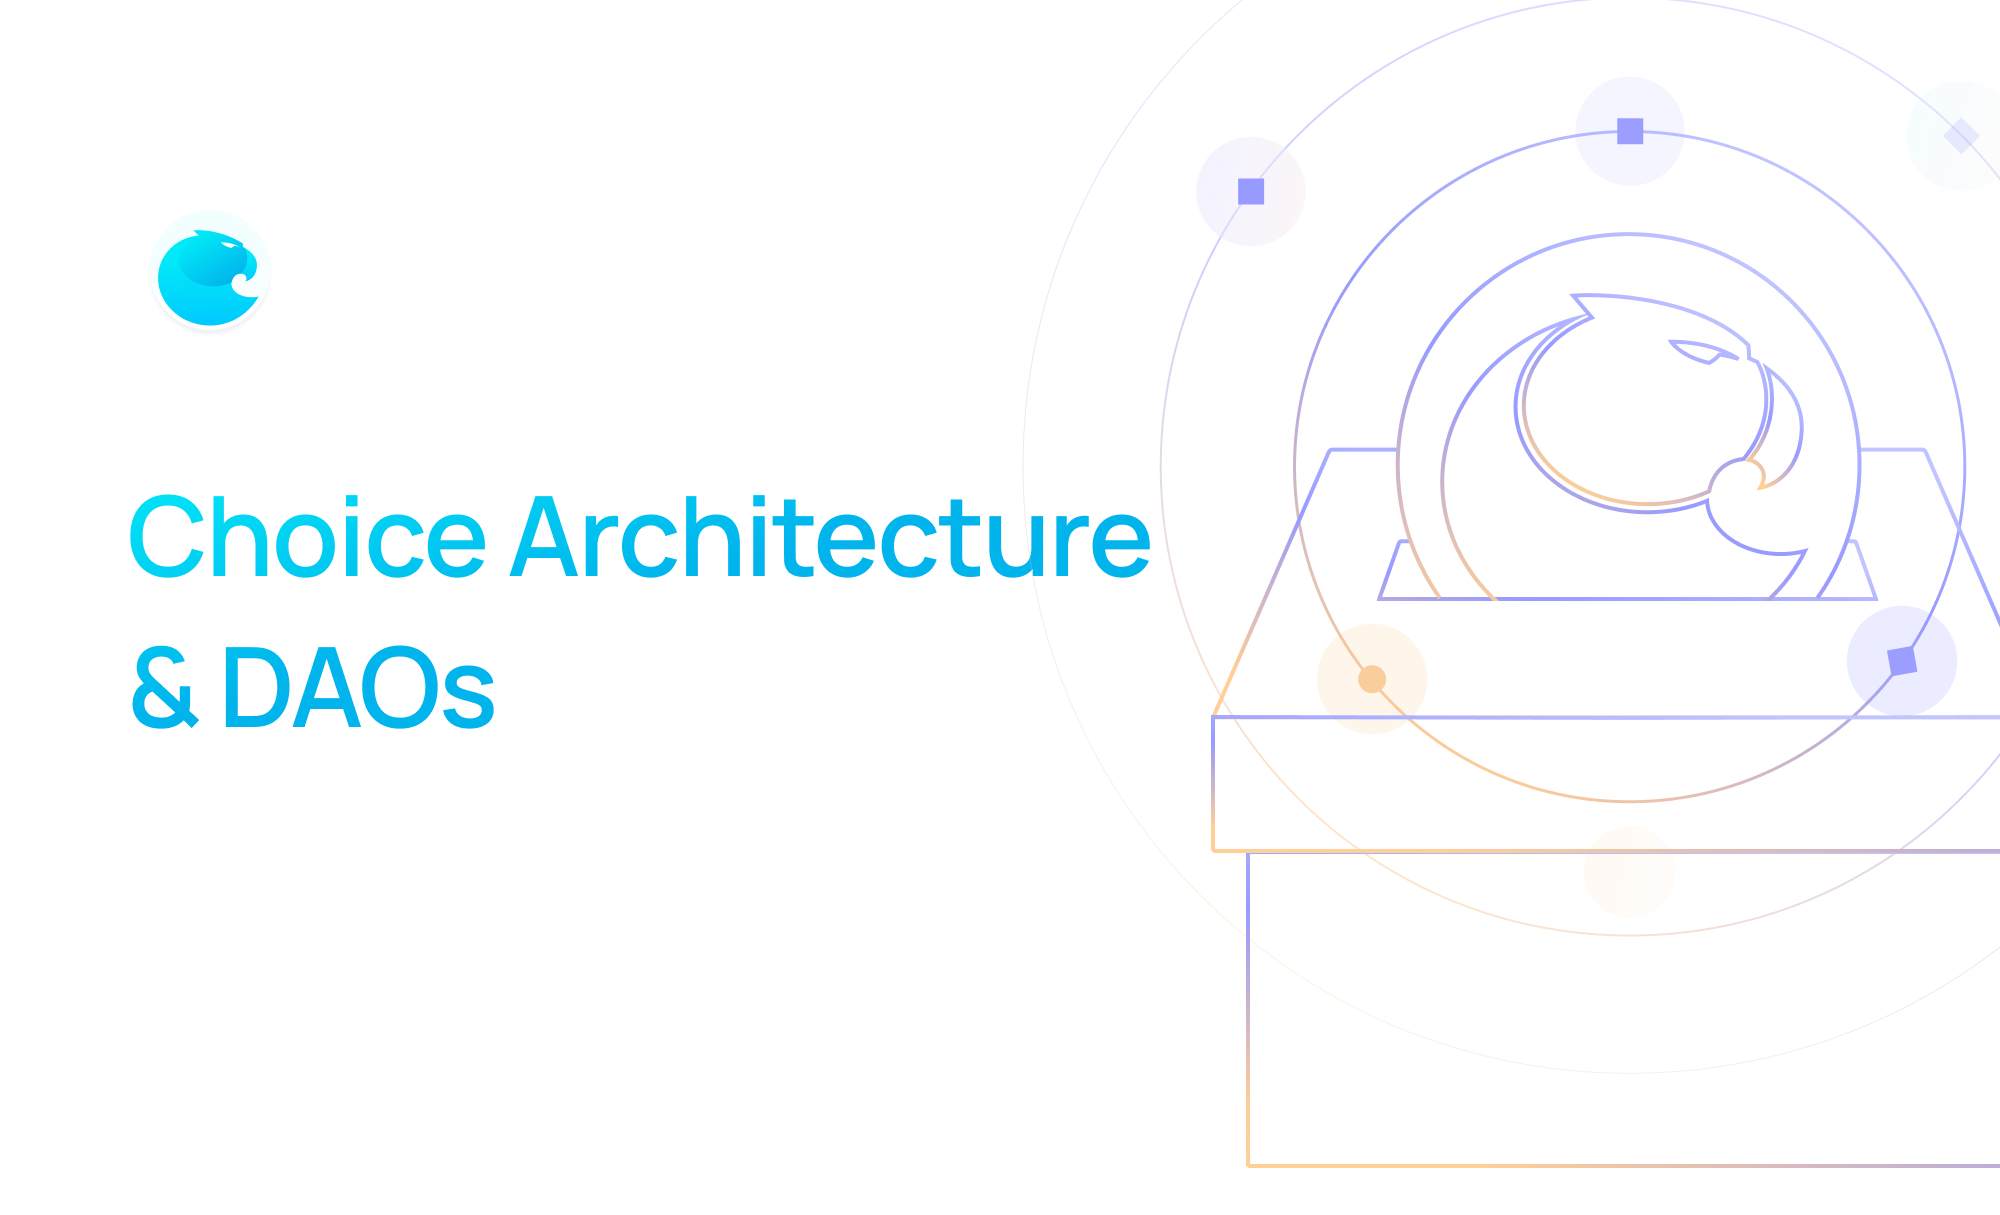 Choice Architecture & DAOs